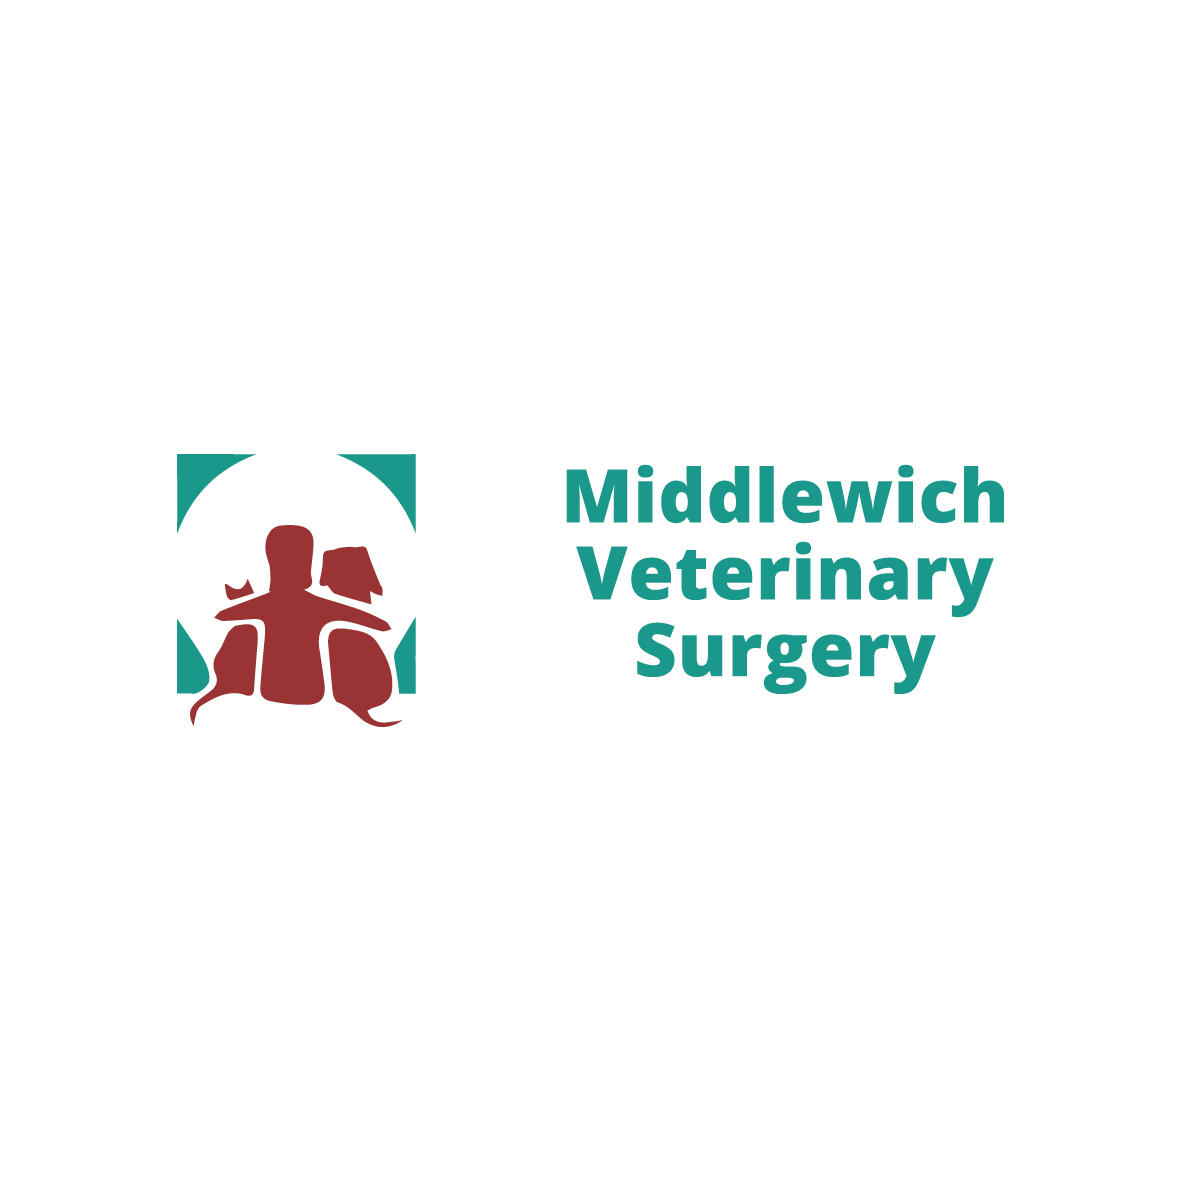 Willows Veterinary Group - Middlewich Veterinary Surgery Logo